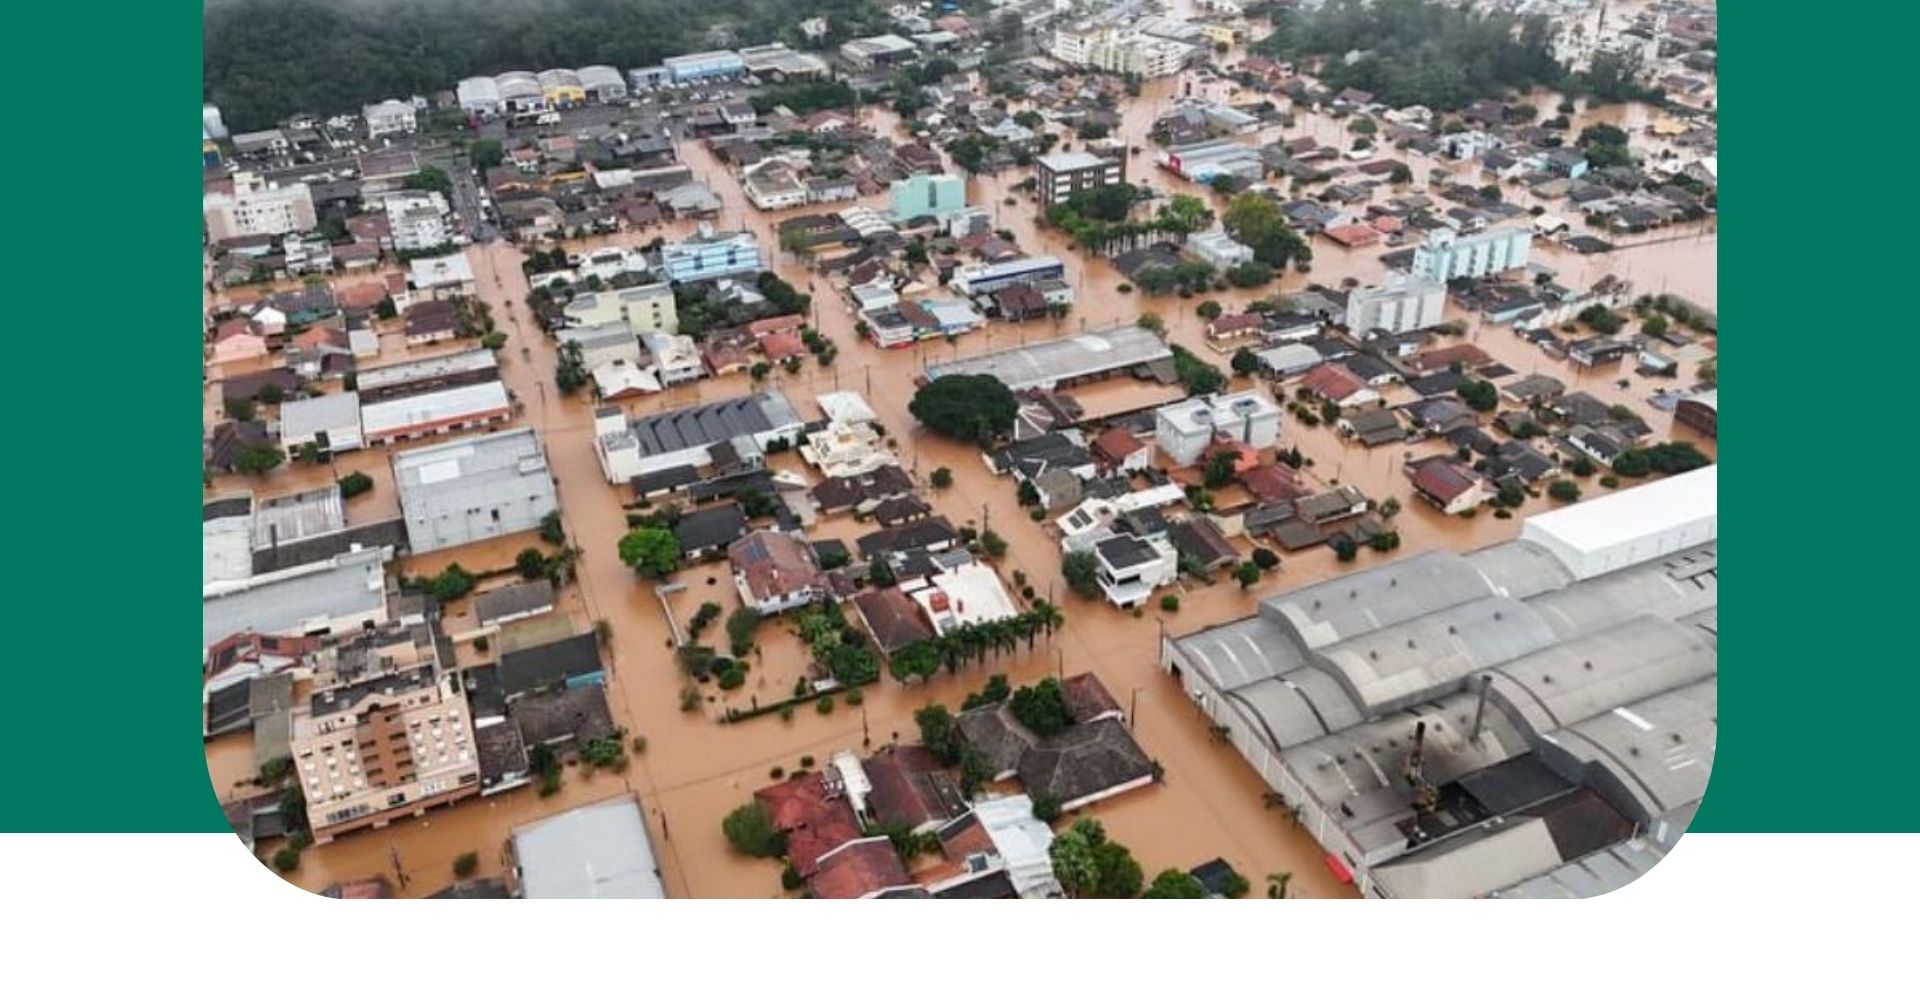 ADRA helps after floods in Brazil.